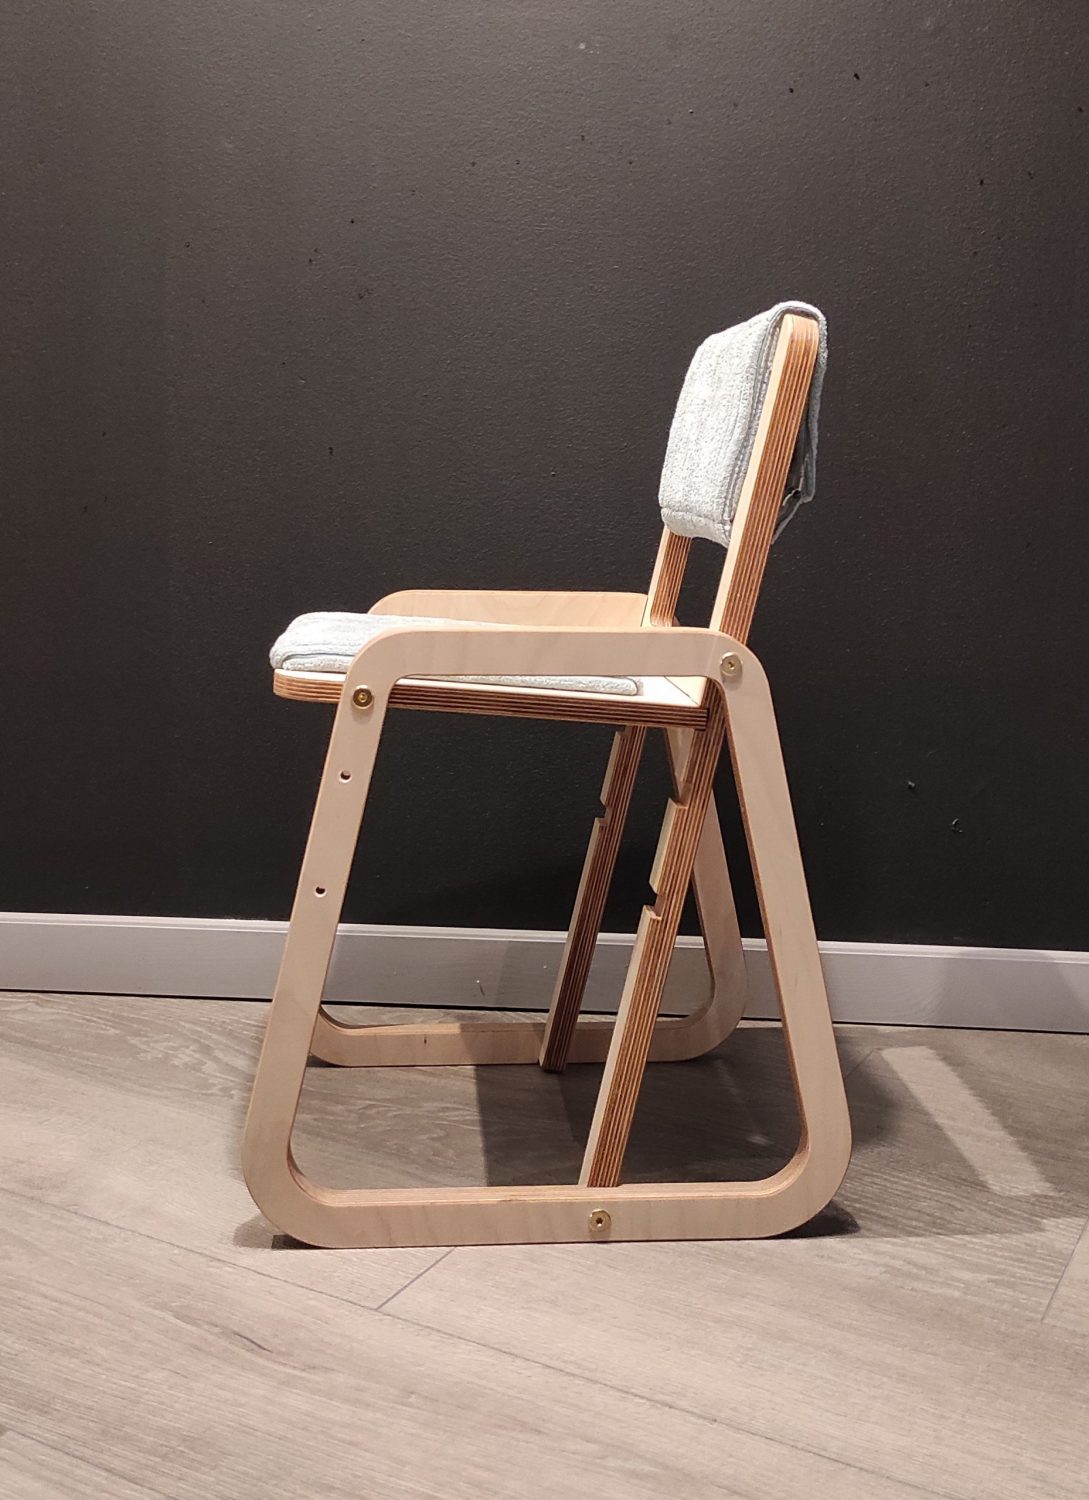 Adjustable children chair by Luula